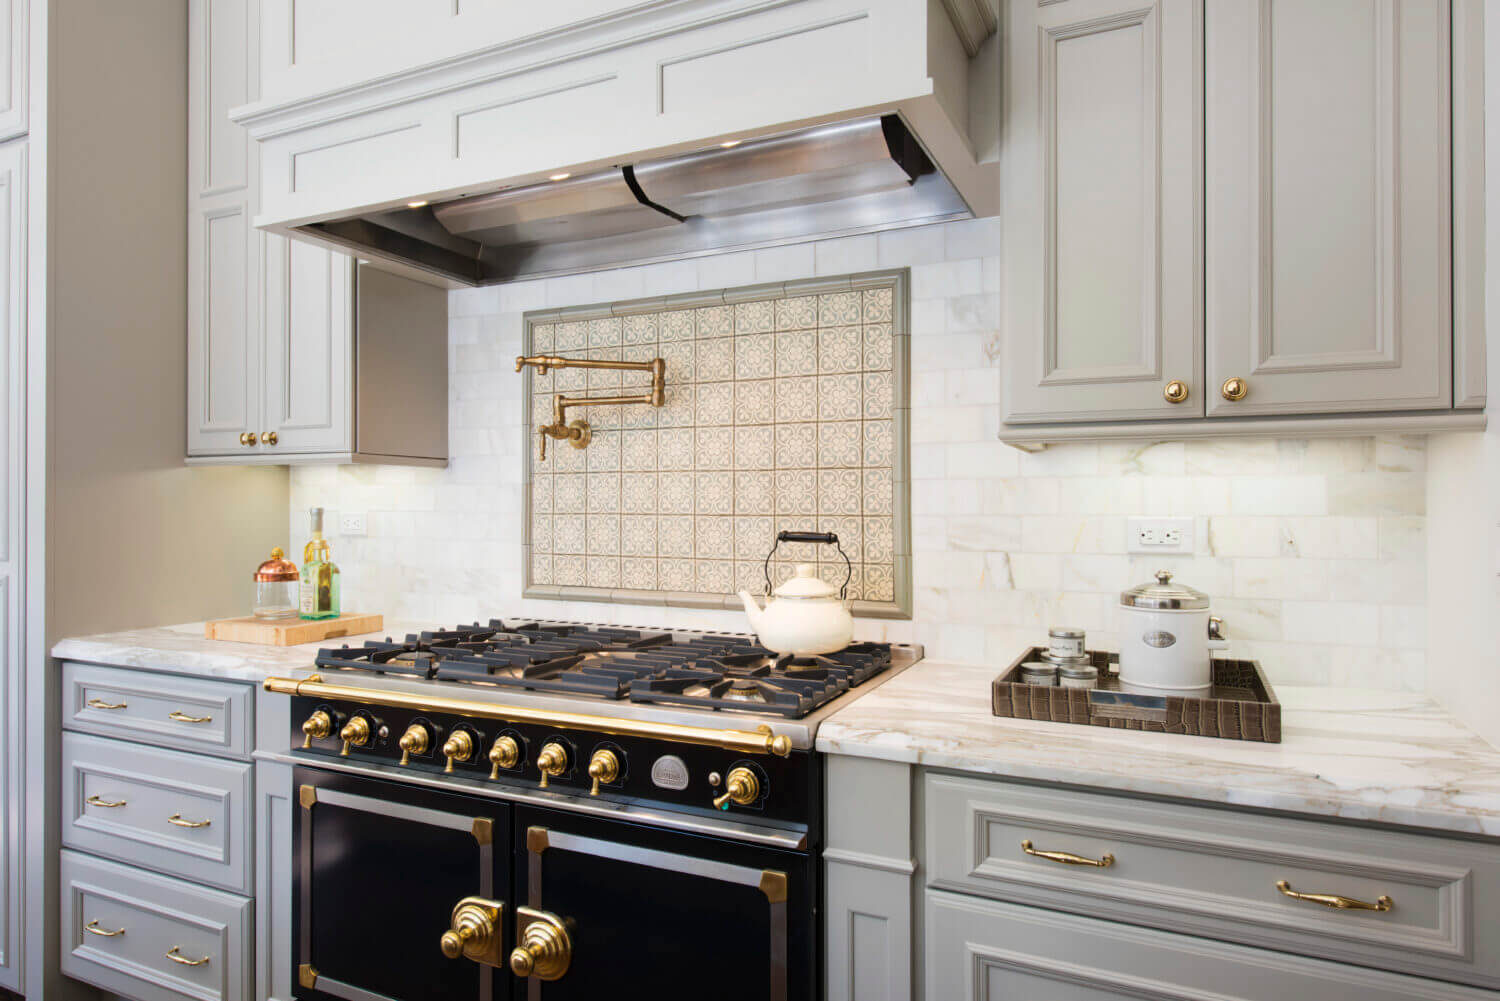 Beautiful slide-in range with double ovens in a gray kitchen design with gray painted kitchen cabinets and light gray backsplash tiles. Gold hardware, pot filler, and accents add warmth to the cool color palette. A detailed wood hood adds elegance to the design.